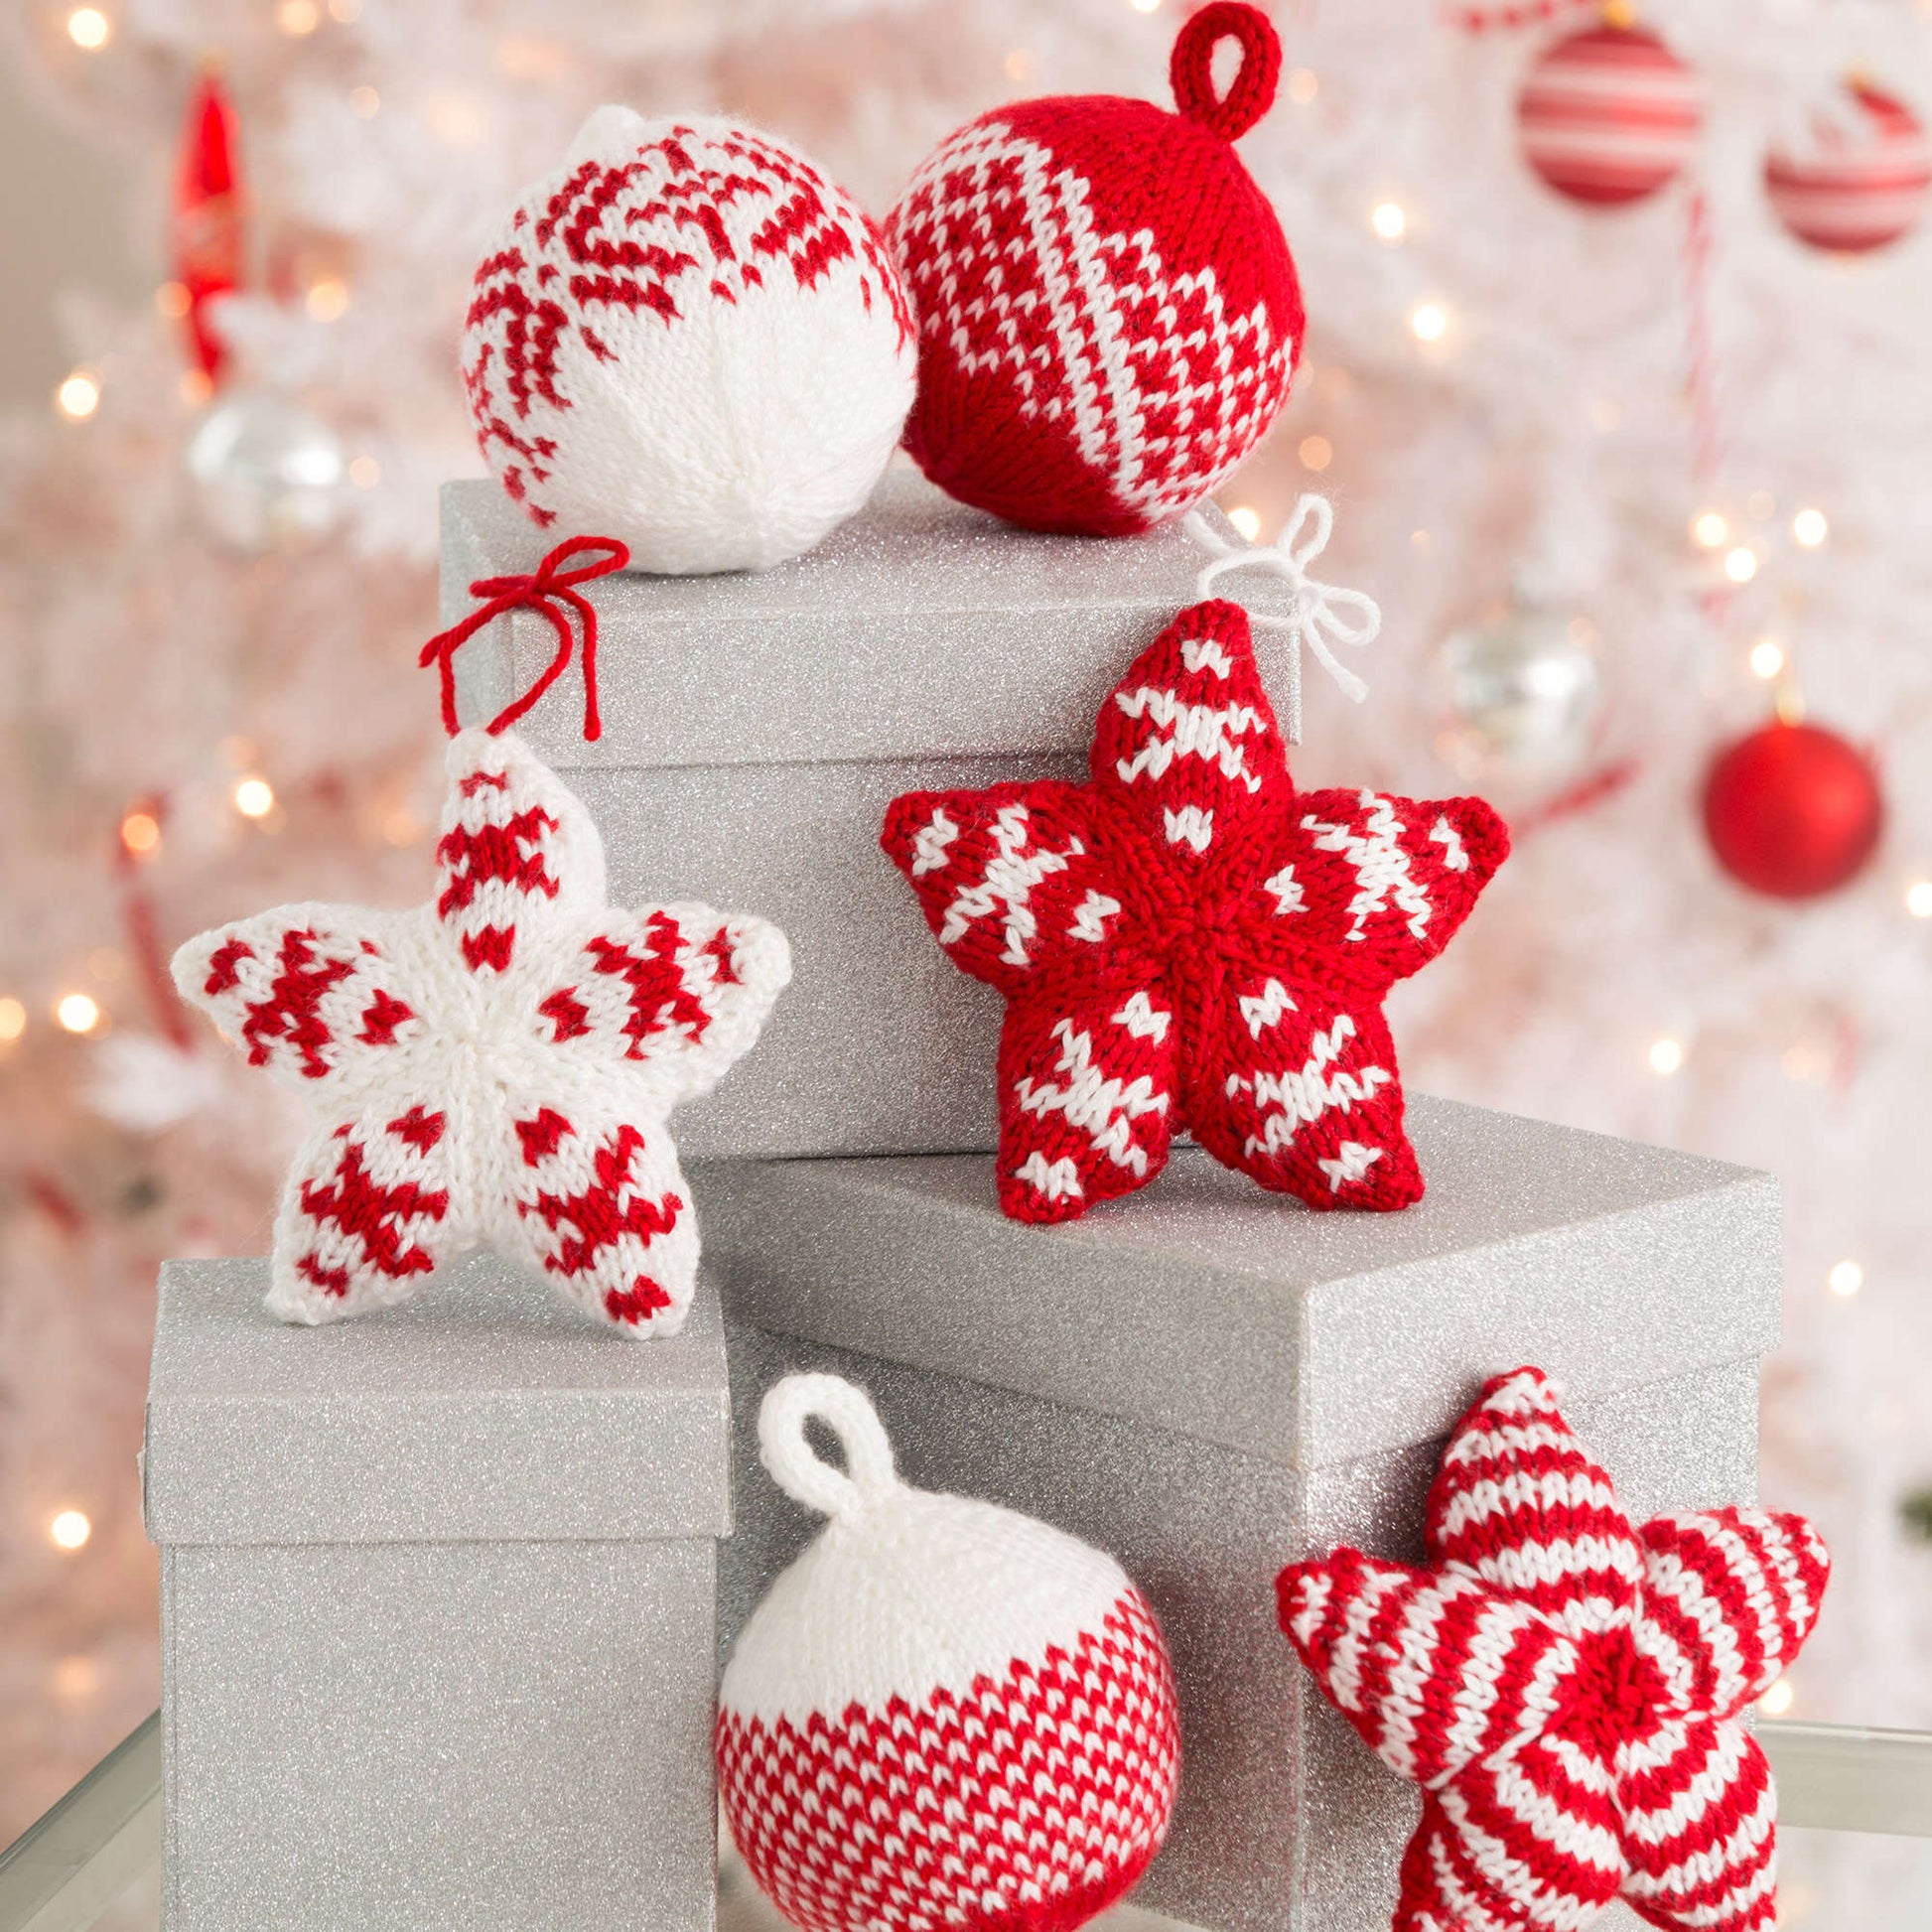 Free Red Heart Holiday Stars And Balls Ornaments Knit Pattern